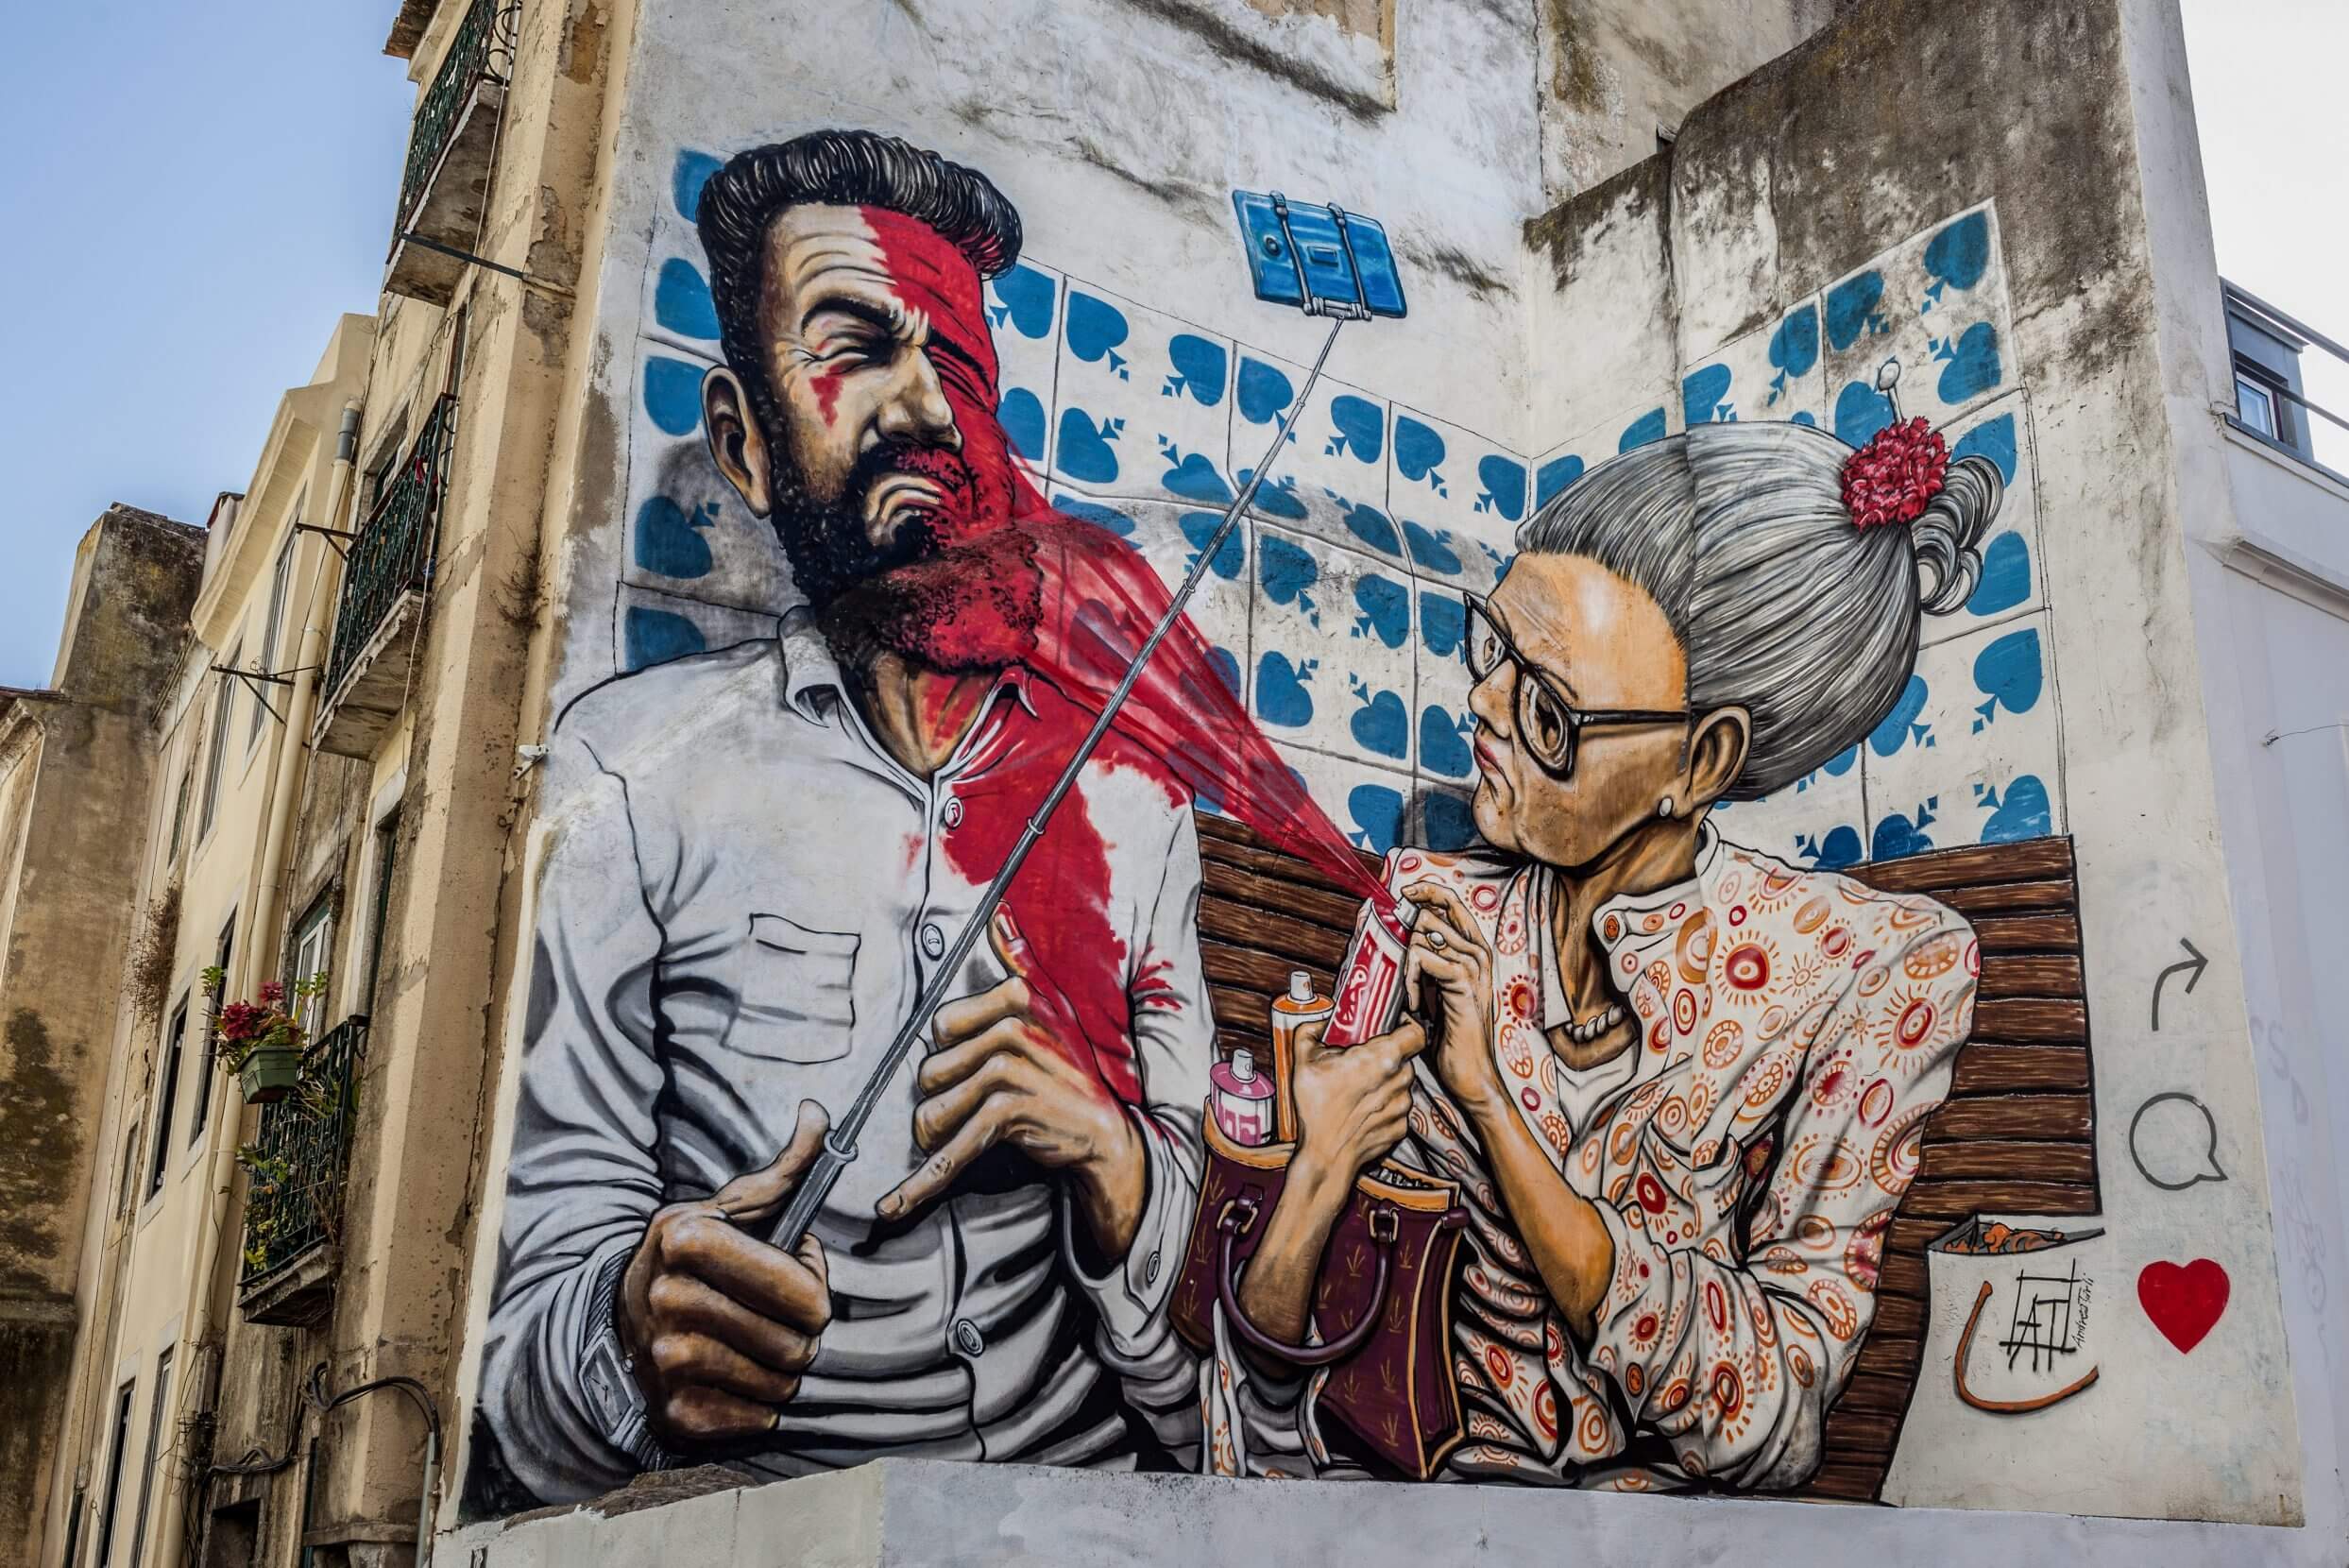 Listicle Jenna Scatena Pre-pandemic, local displeasure with over-tourism in the Portuguese capital reached larger-than-life heights. Here, a mural in the Lisbon neighborhood of Mouraria turns the notion of painting the town red on its bearded-hipster head.